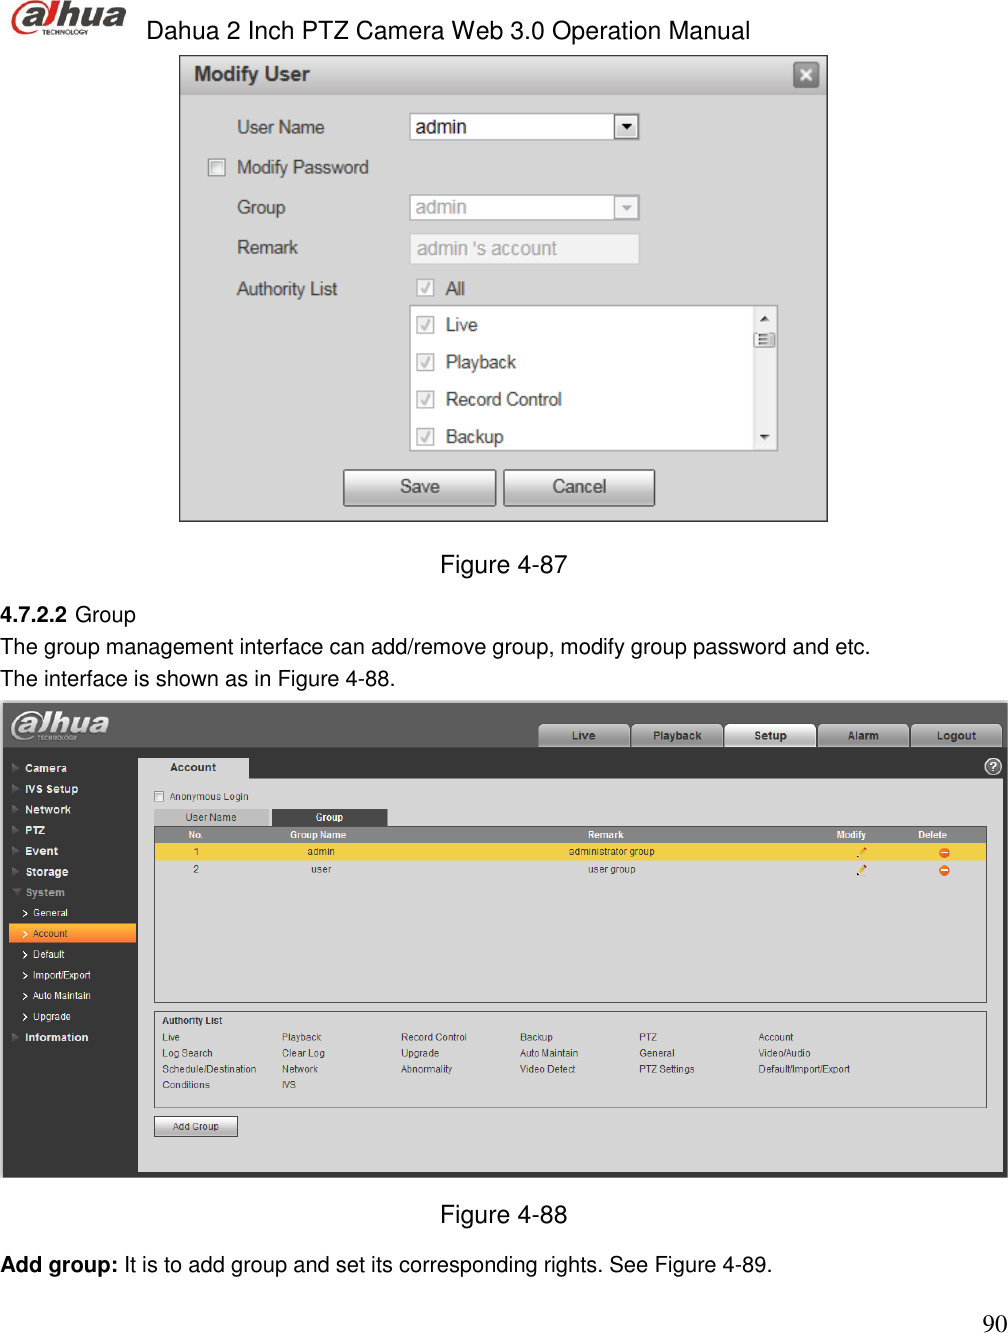  Dahua 2 Inch PTZ Camera Web 3.0 Operation Manual                                                                             90  Figure 4-87 4.7.2.2 Group The group management interface can add/remove group, modify group password and etc.  The interface is shown as in Figure 4-88.  Figure 4-88 Add group: It is to add group and set its corresponding rights. See Figure 4-89. 